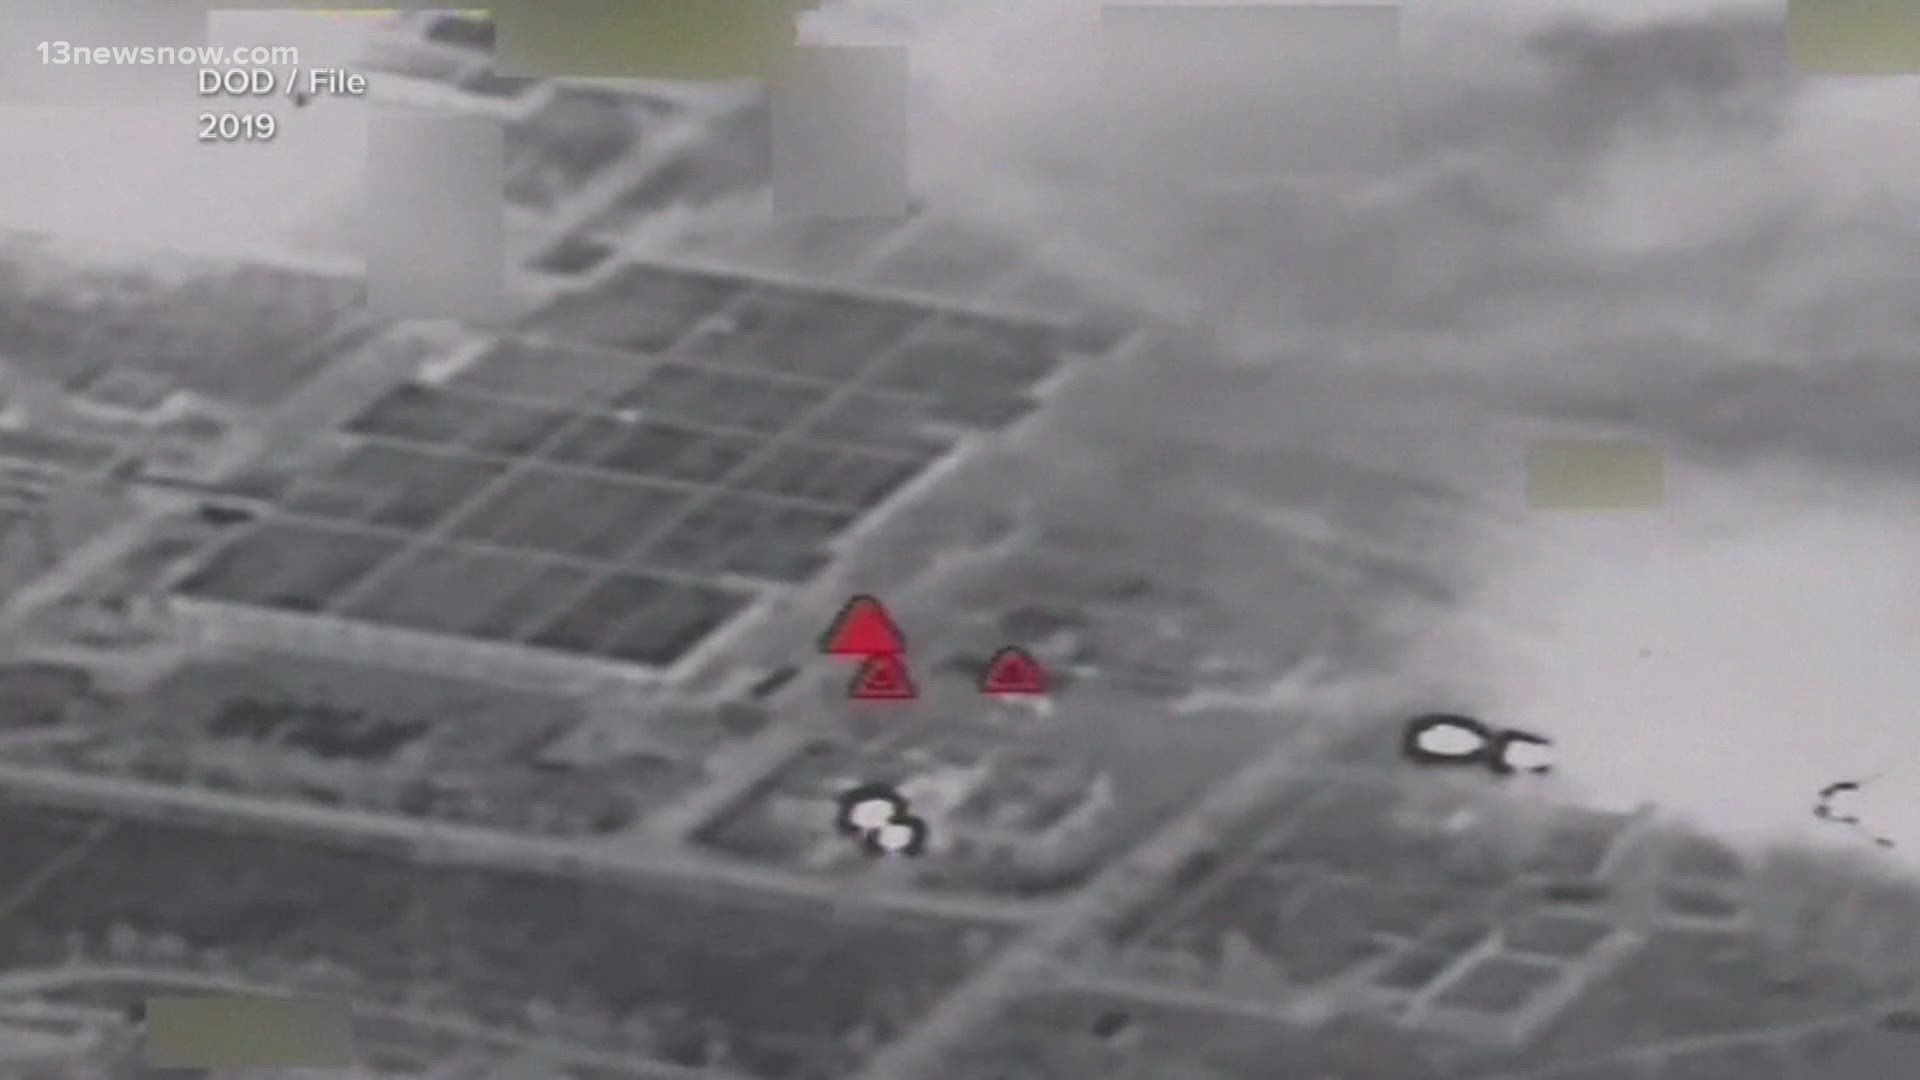 U.S. air strikes are ramping up in the Middle East, this time targeting militia groups in Iraq.